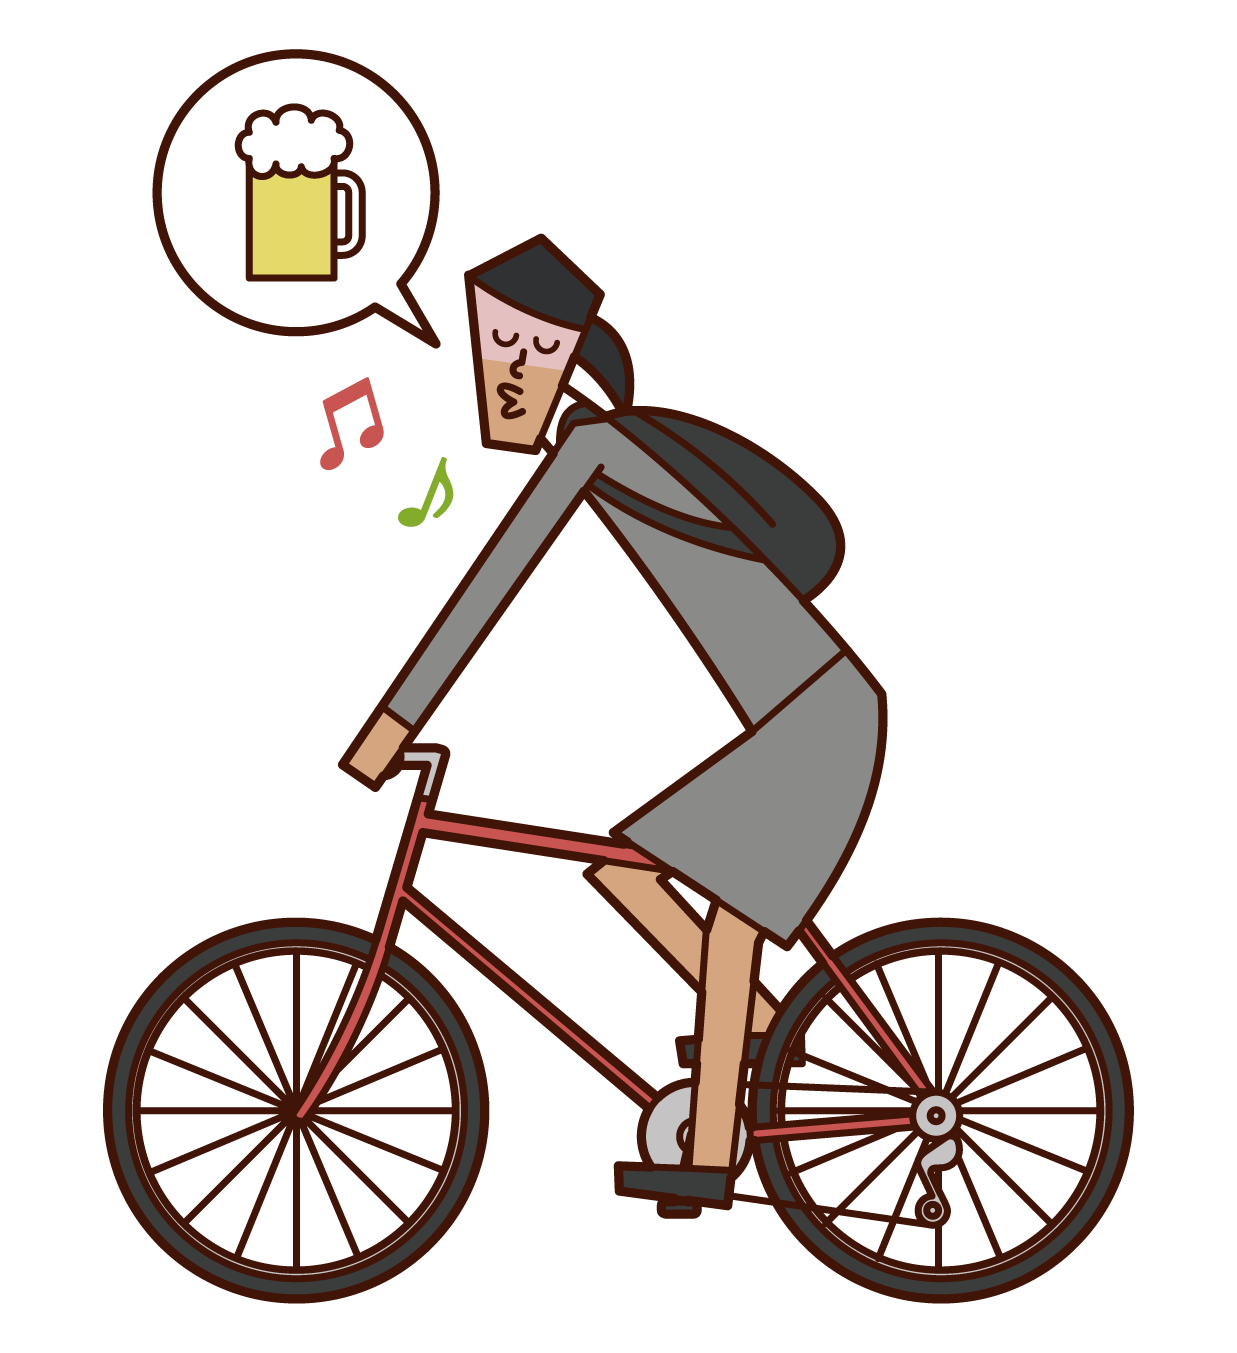 Illustration of a woman driving drunk on a bicycle